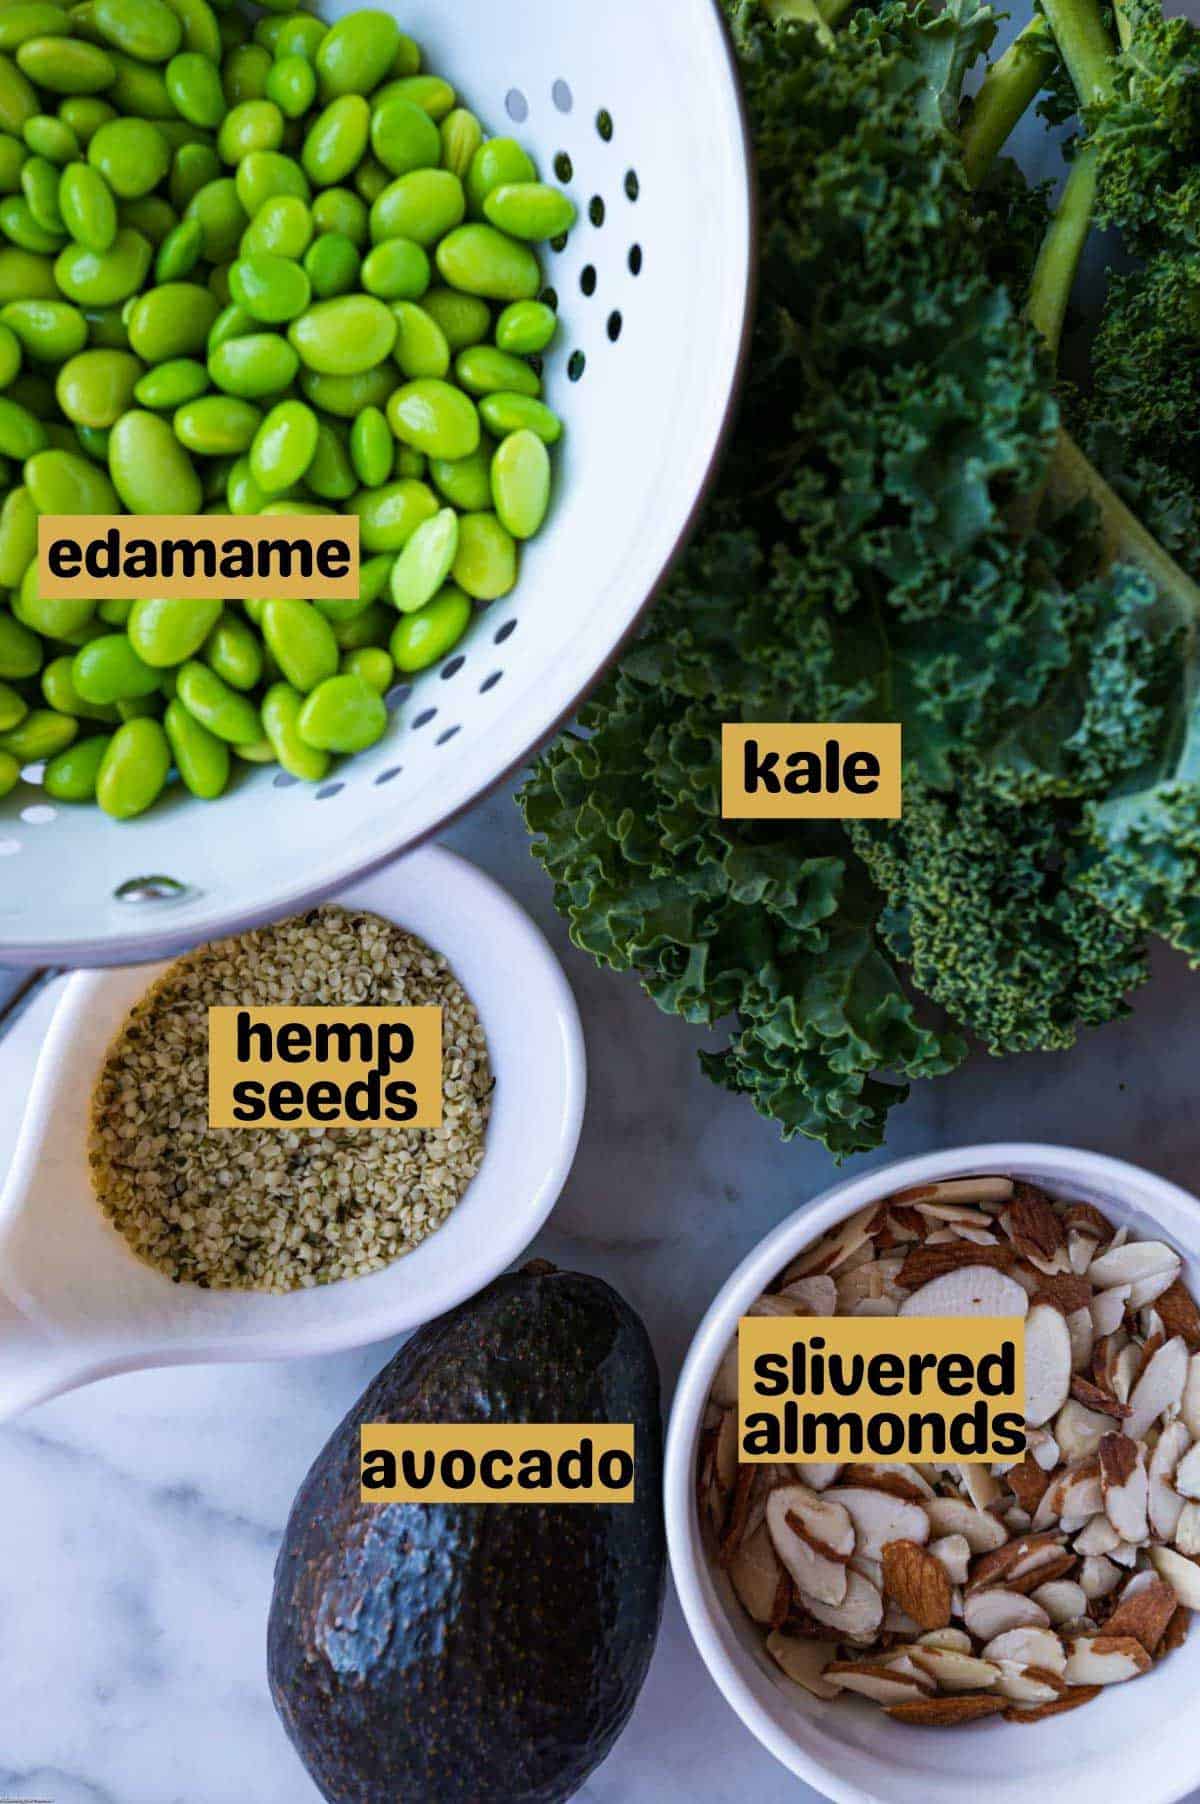 Edamame in a white colander, a bunch of kale, hemp seeds in a small white bowl, one avocado, and slivered almonds in a small white bowl. Labeled text. On a white marble tile.